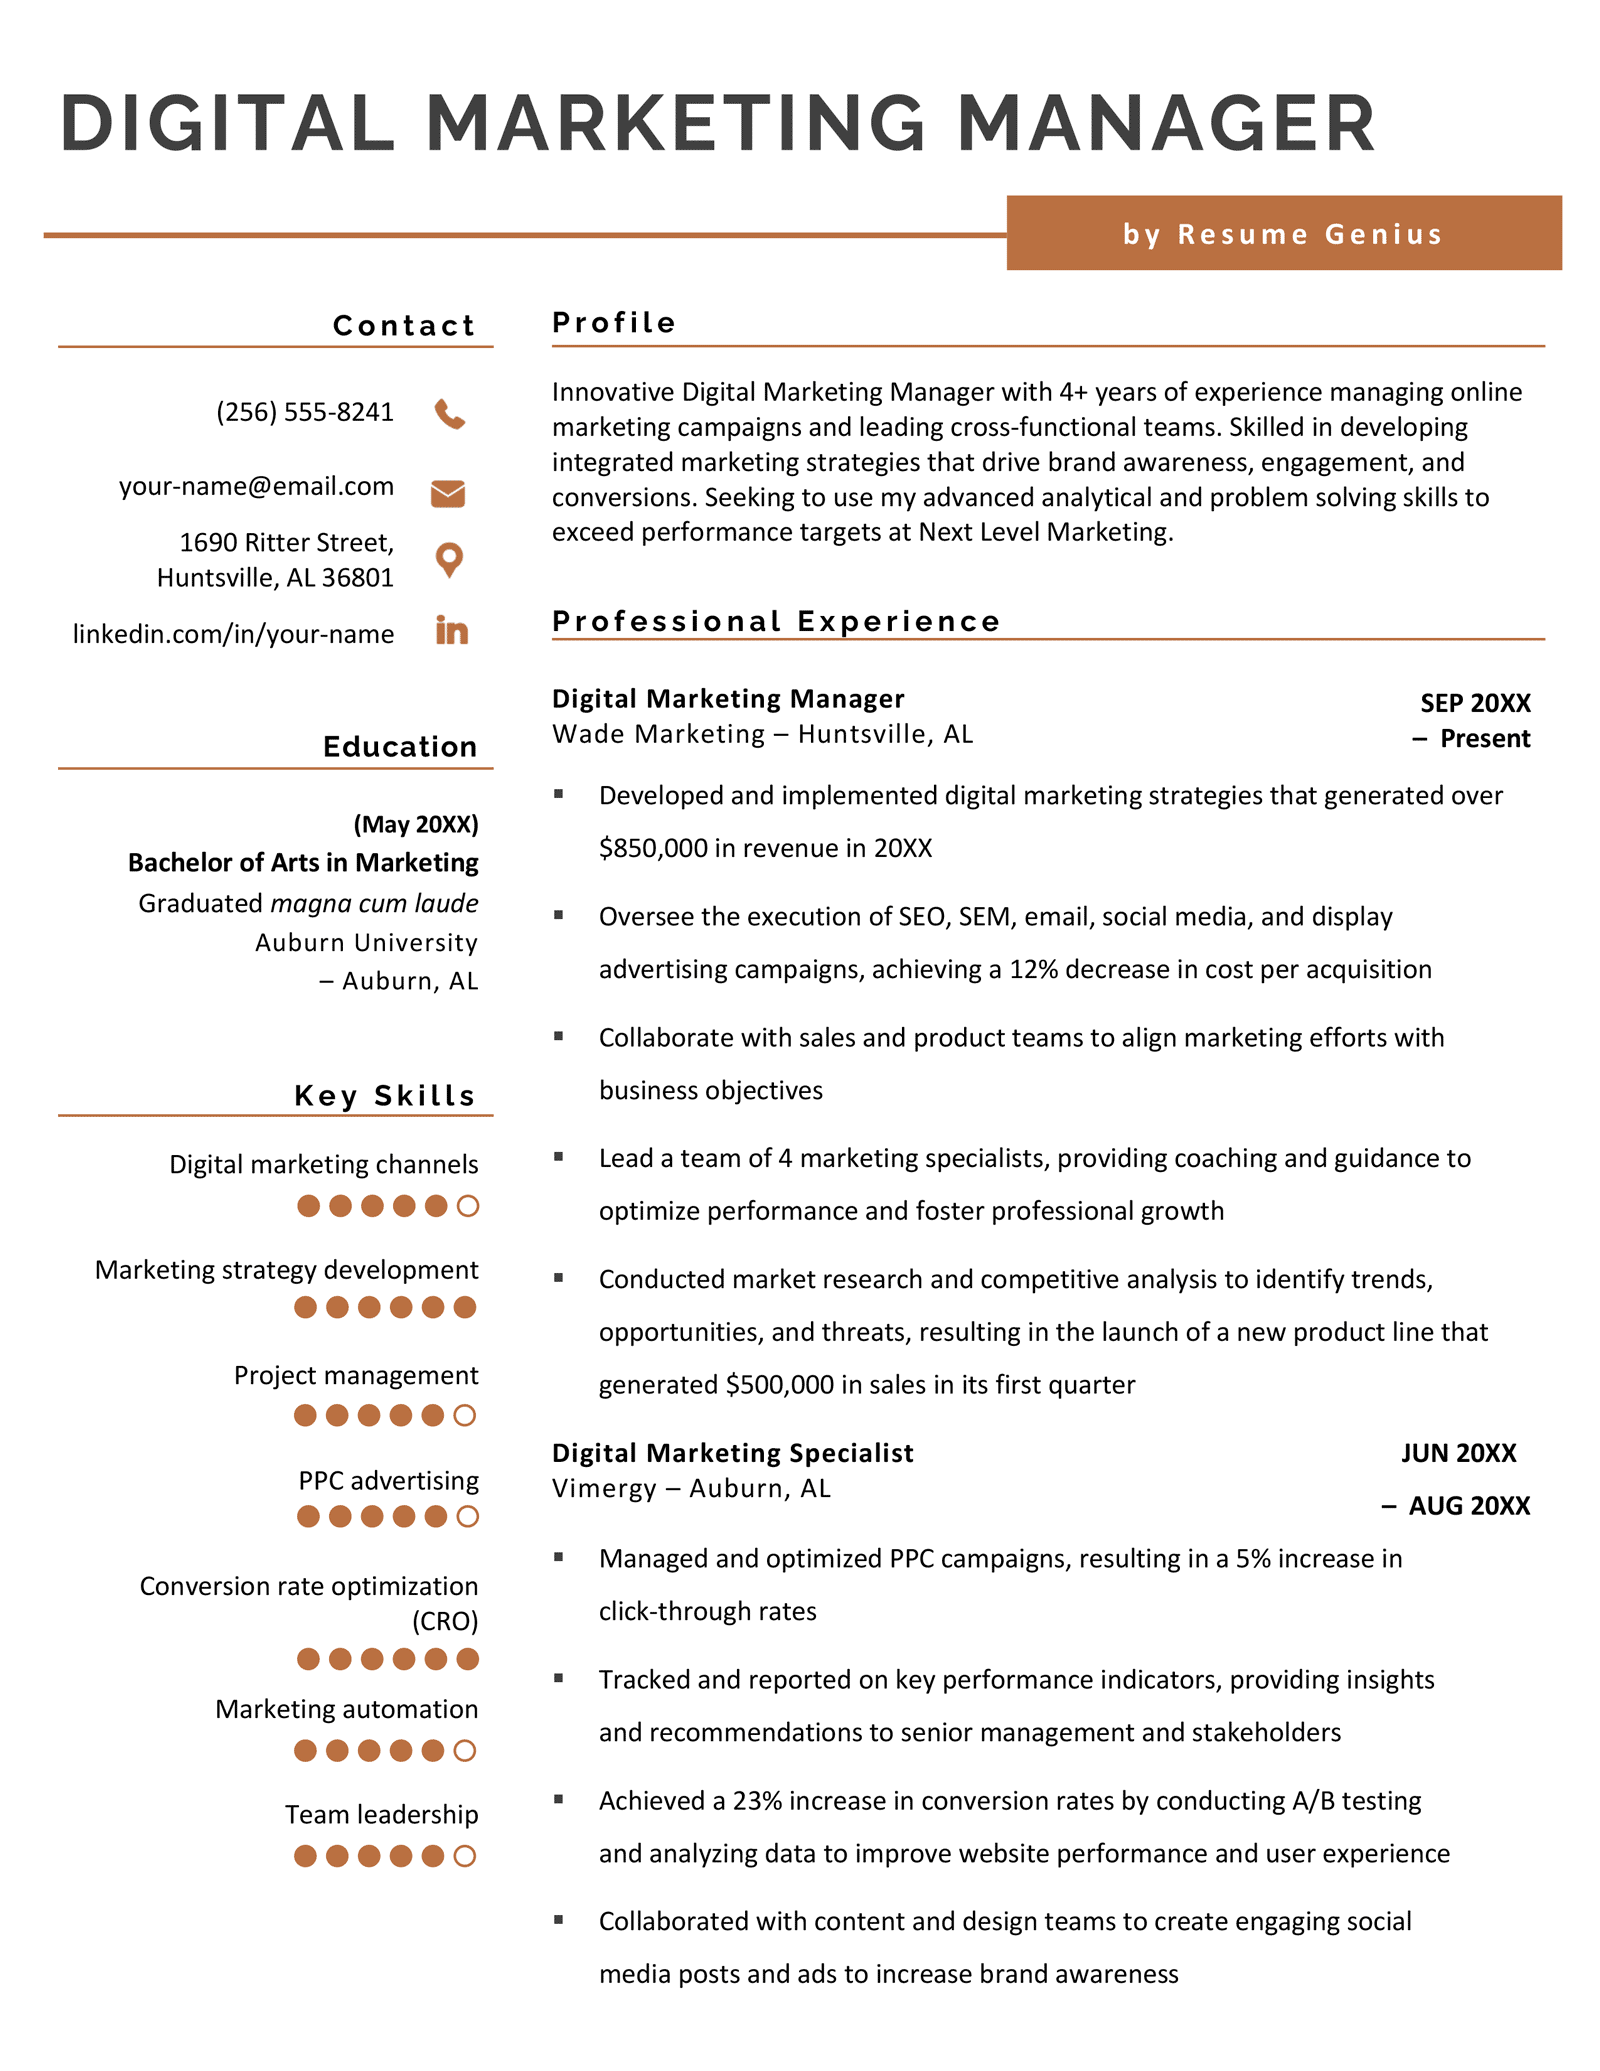 A digital marketing manager resume example using an orange template.